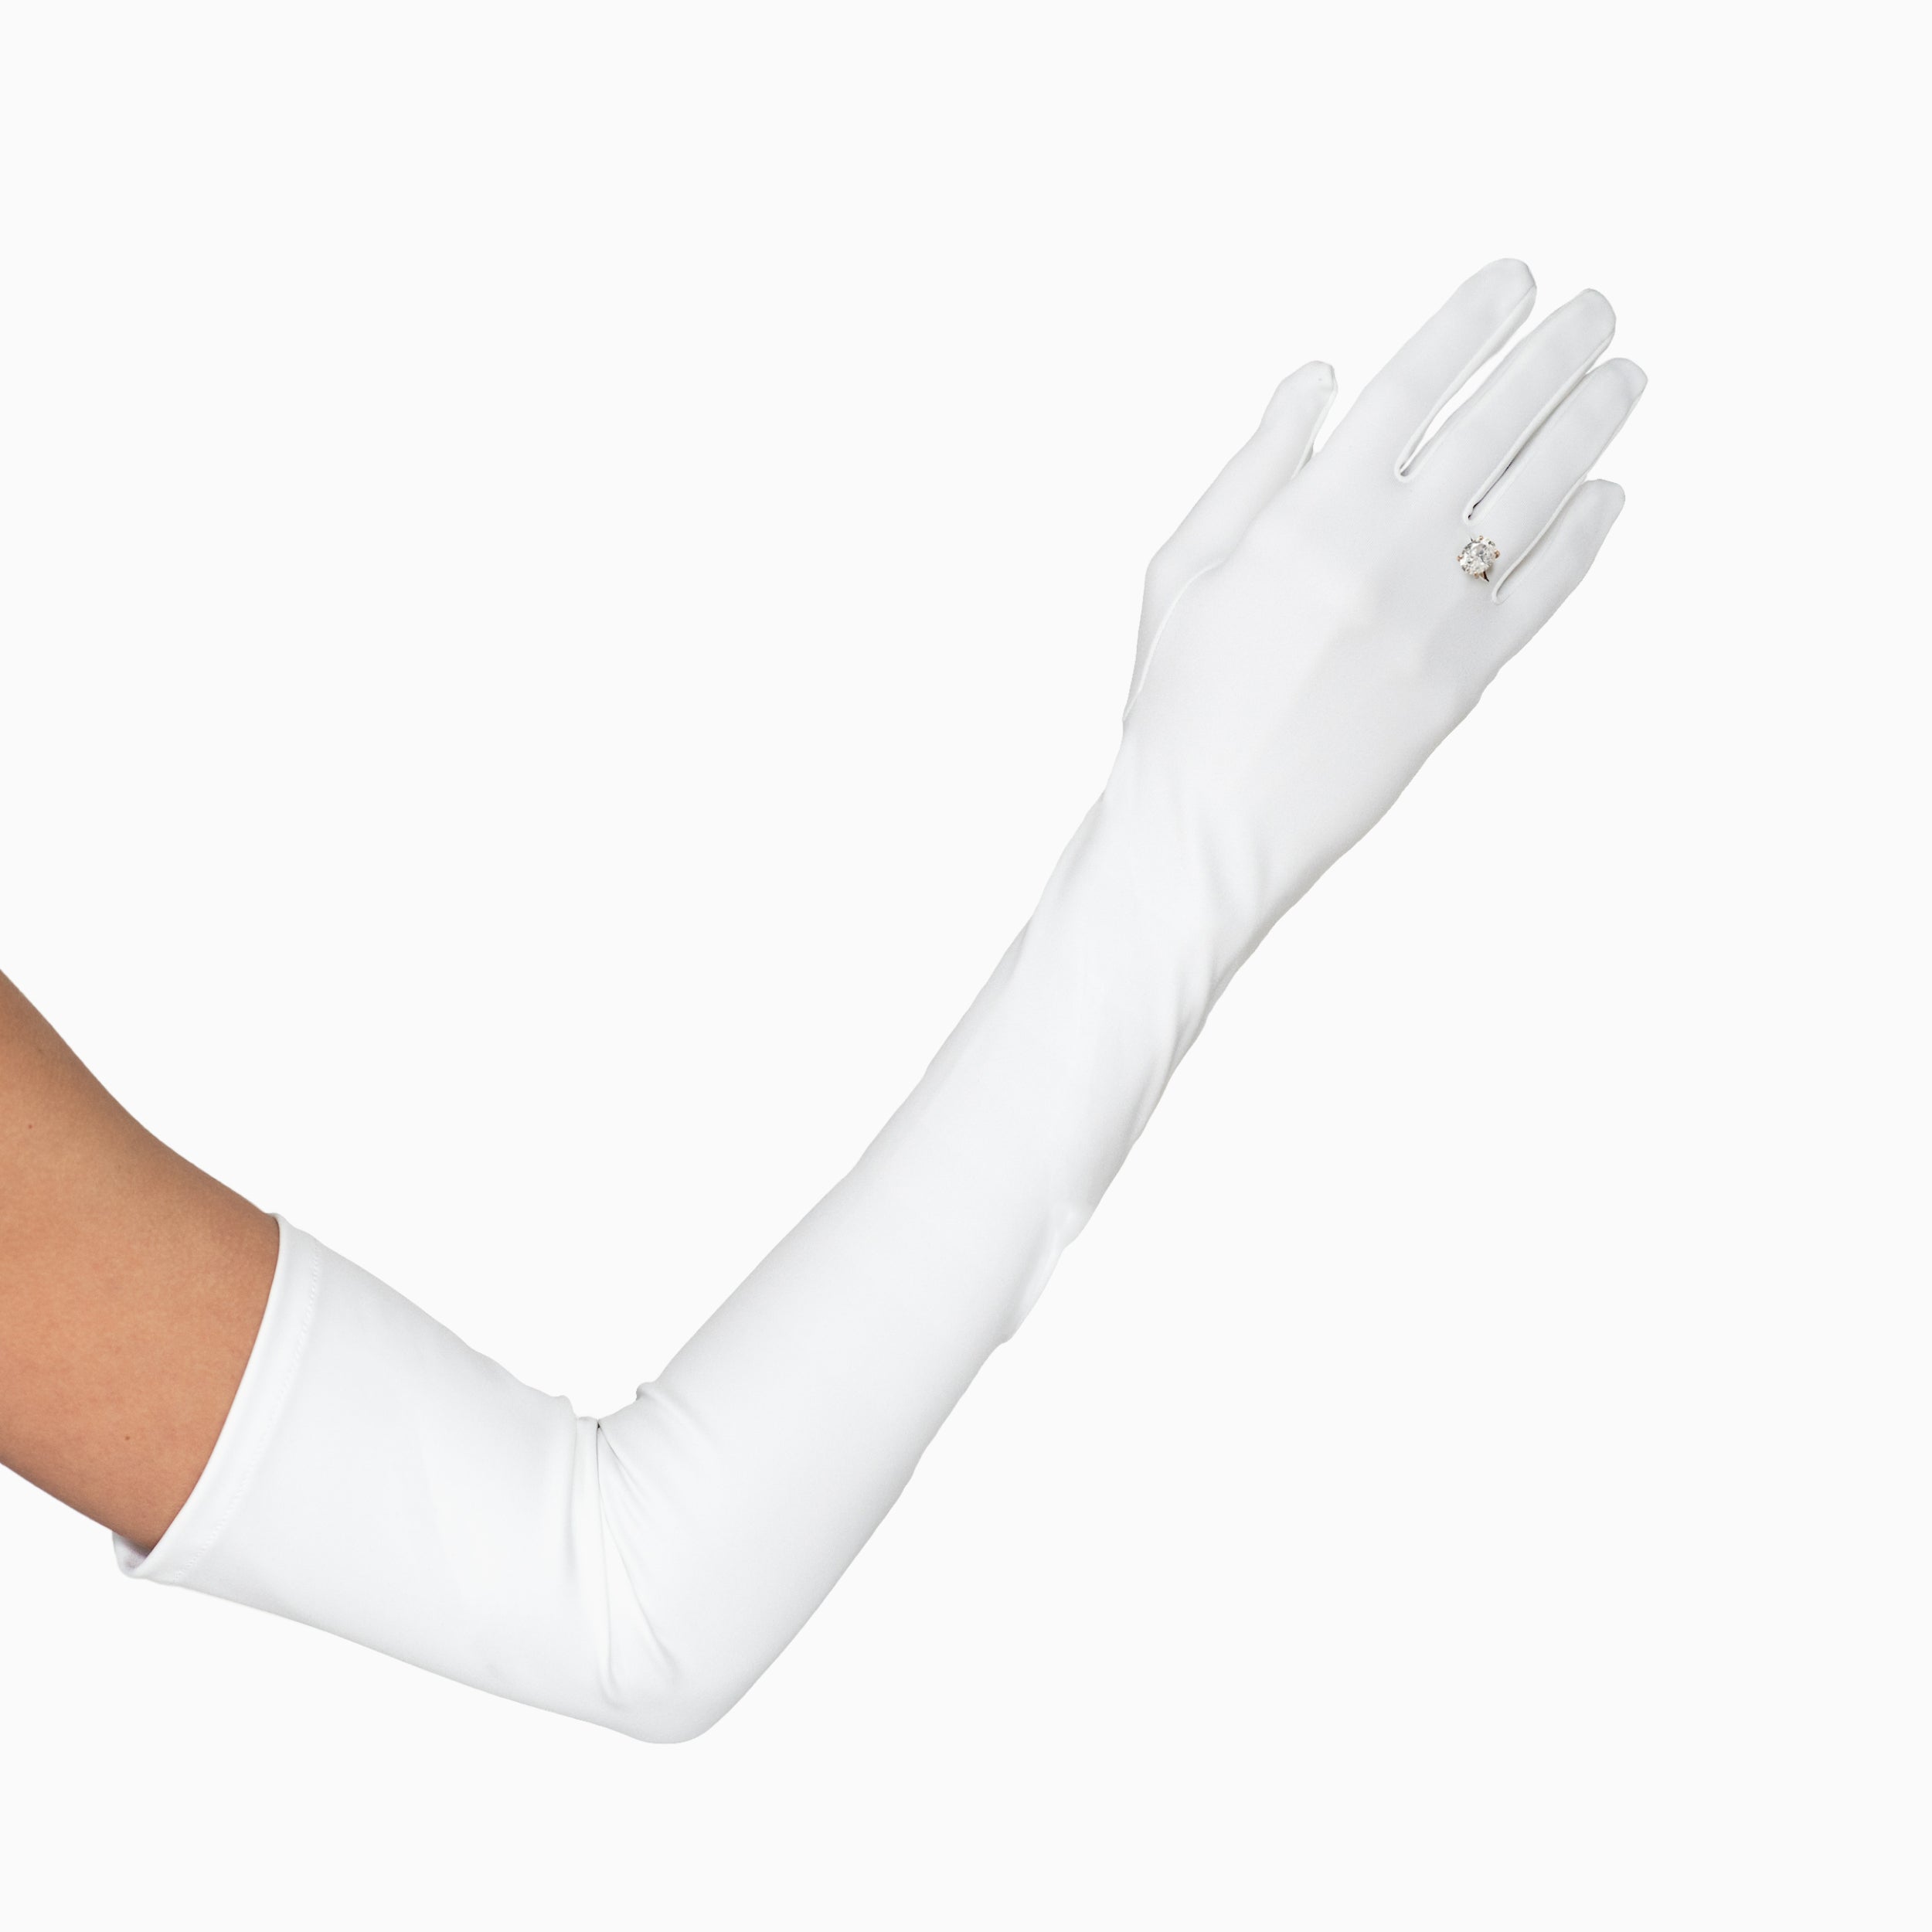 A single arm adorned with THE SUNNY - White Opera Gloves by LadyFinch against a white background, perfect for bridal parties.